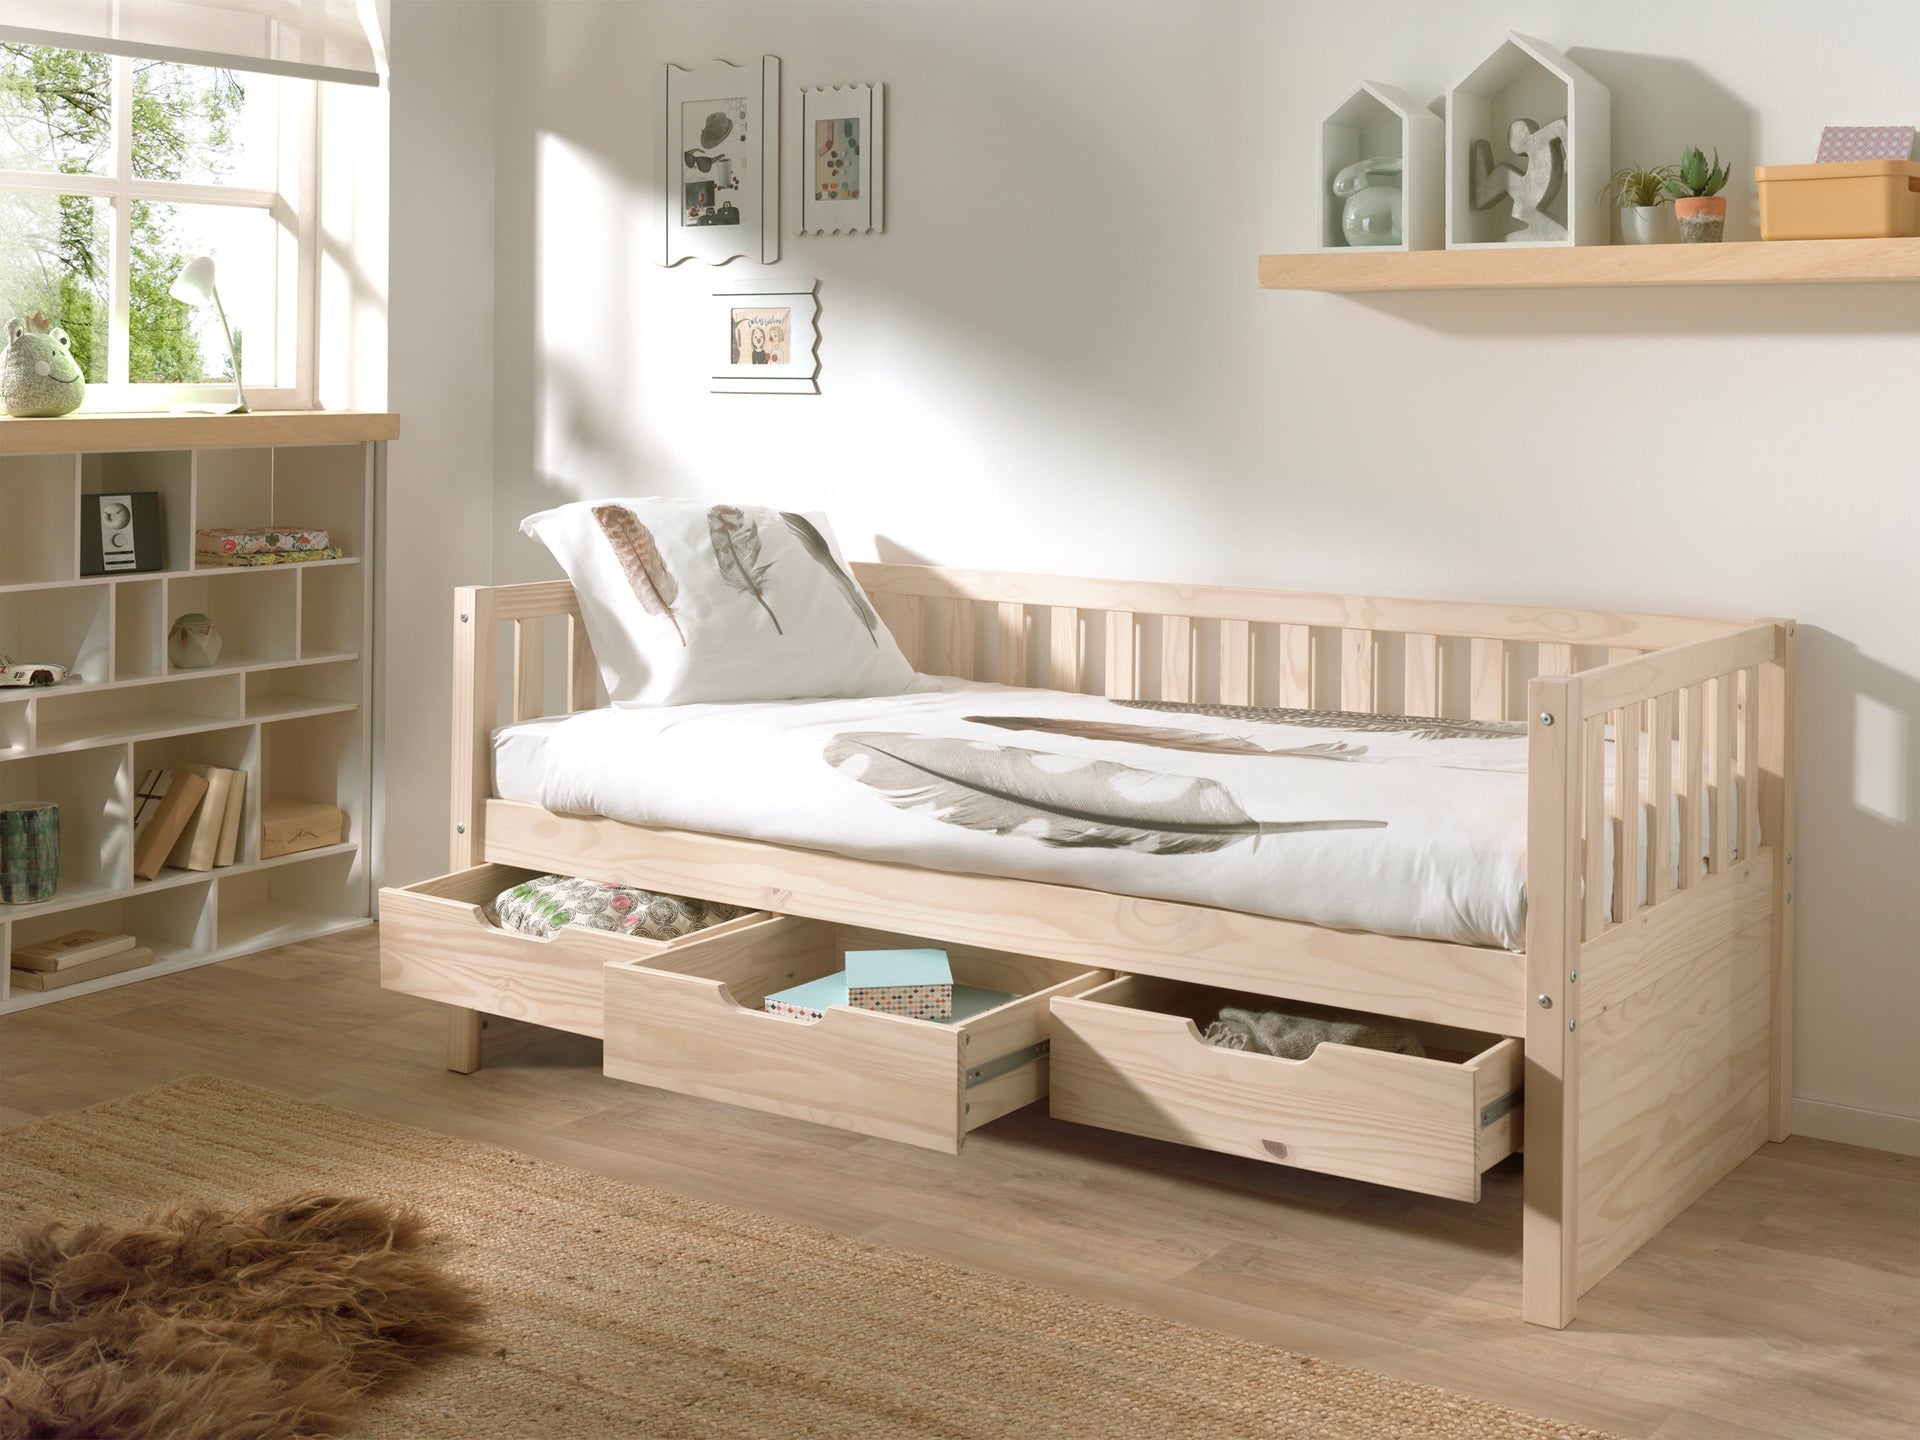 Vipack Fritz Kids Captain Bed with Drawers - Natural Pine